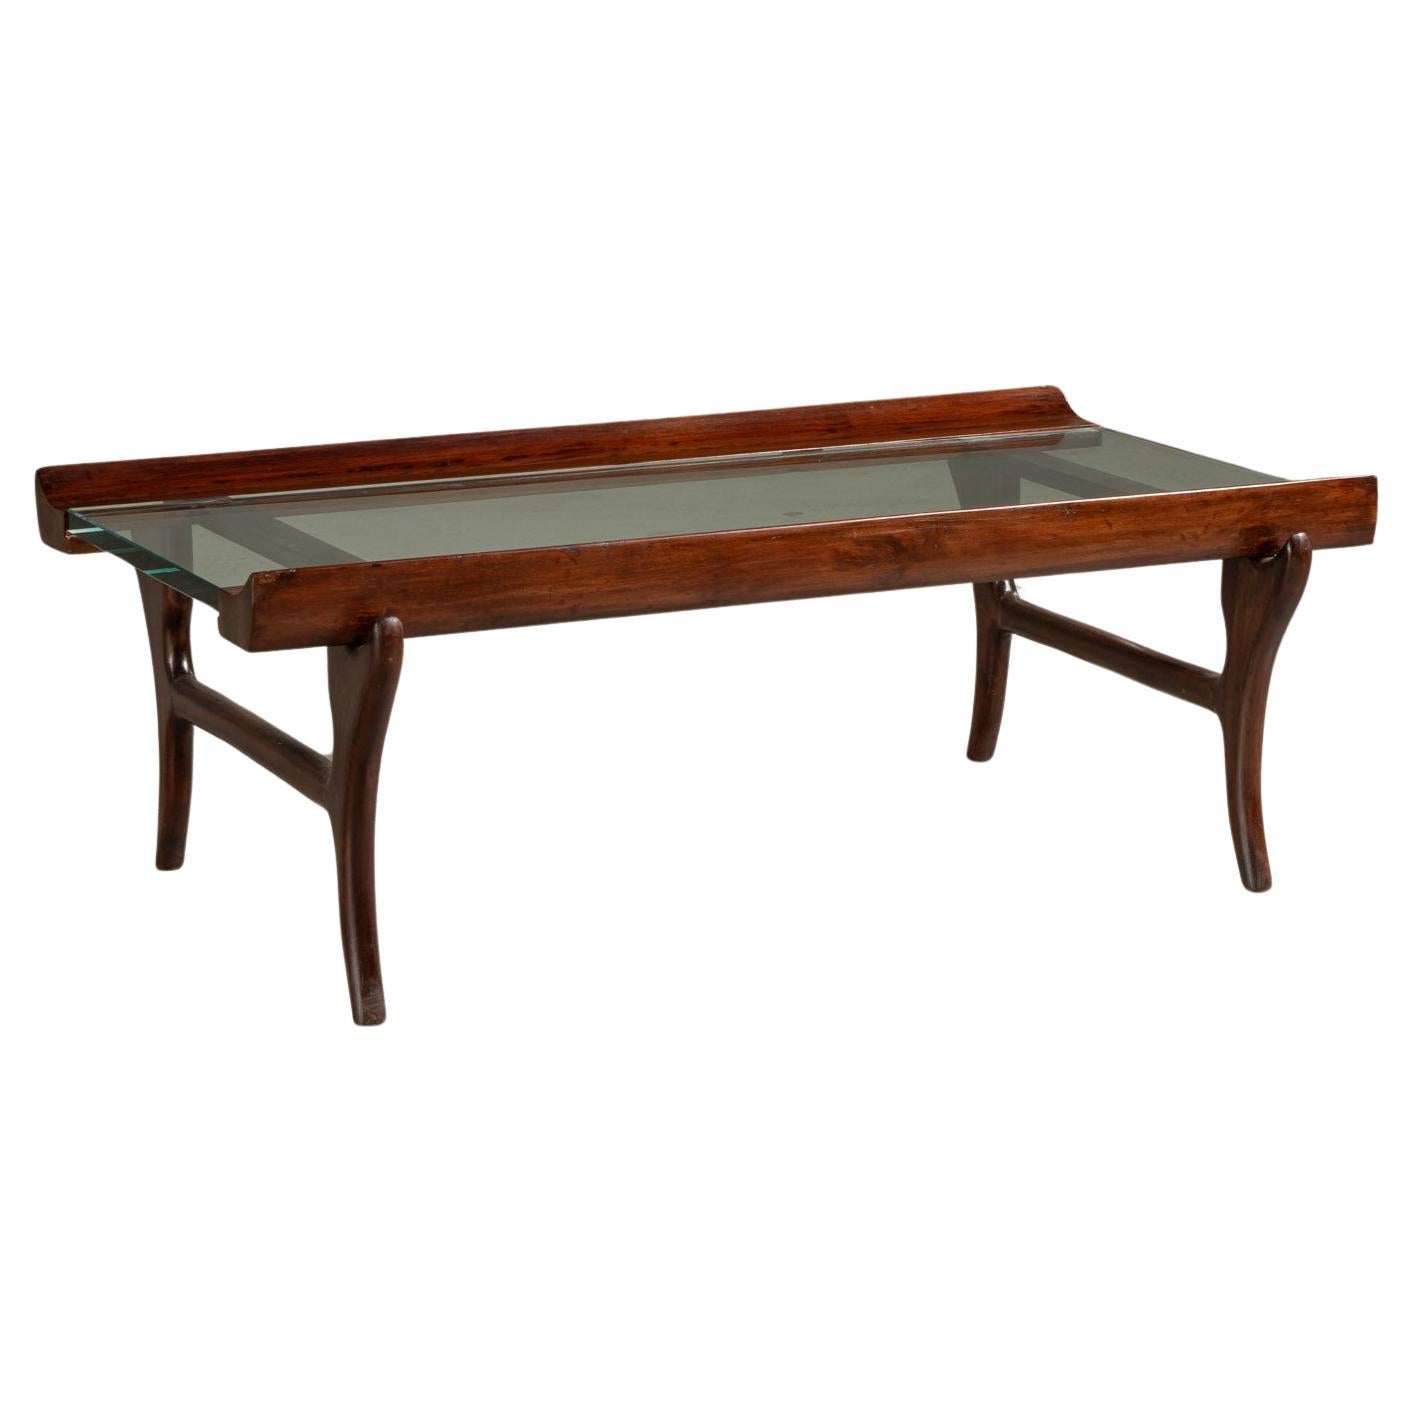 Bentwood Coffee Table, by Giuseppe Scapinelli, Brazilian Mid-Century Design